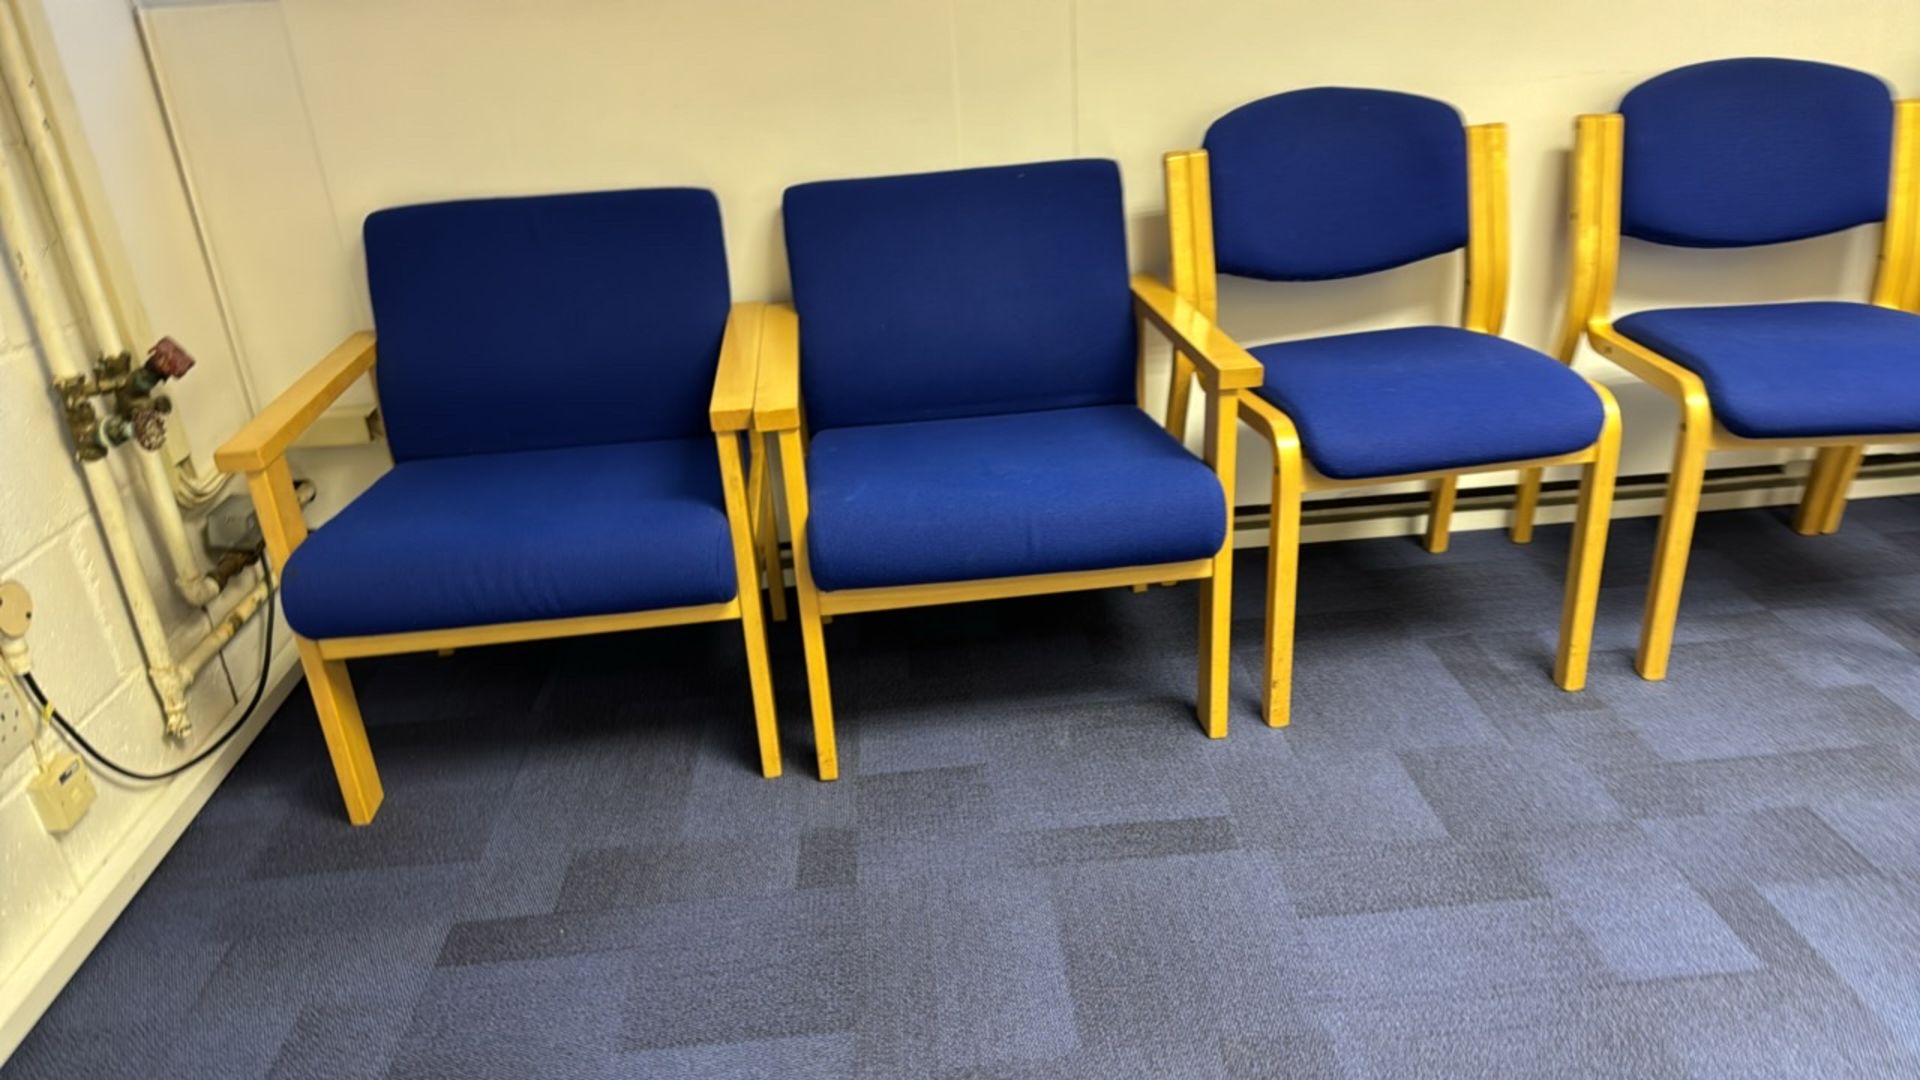 Set Of 7 Waiting Room Chairs - Image 3 of 4